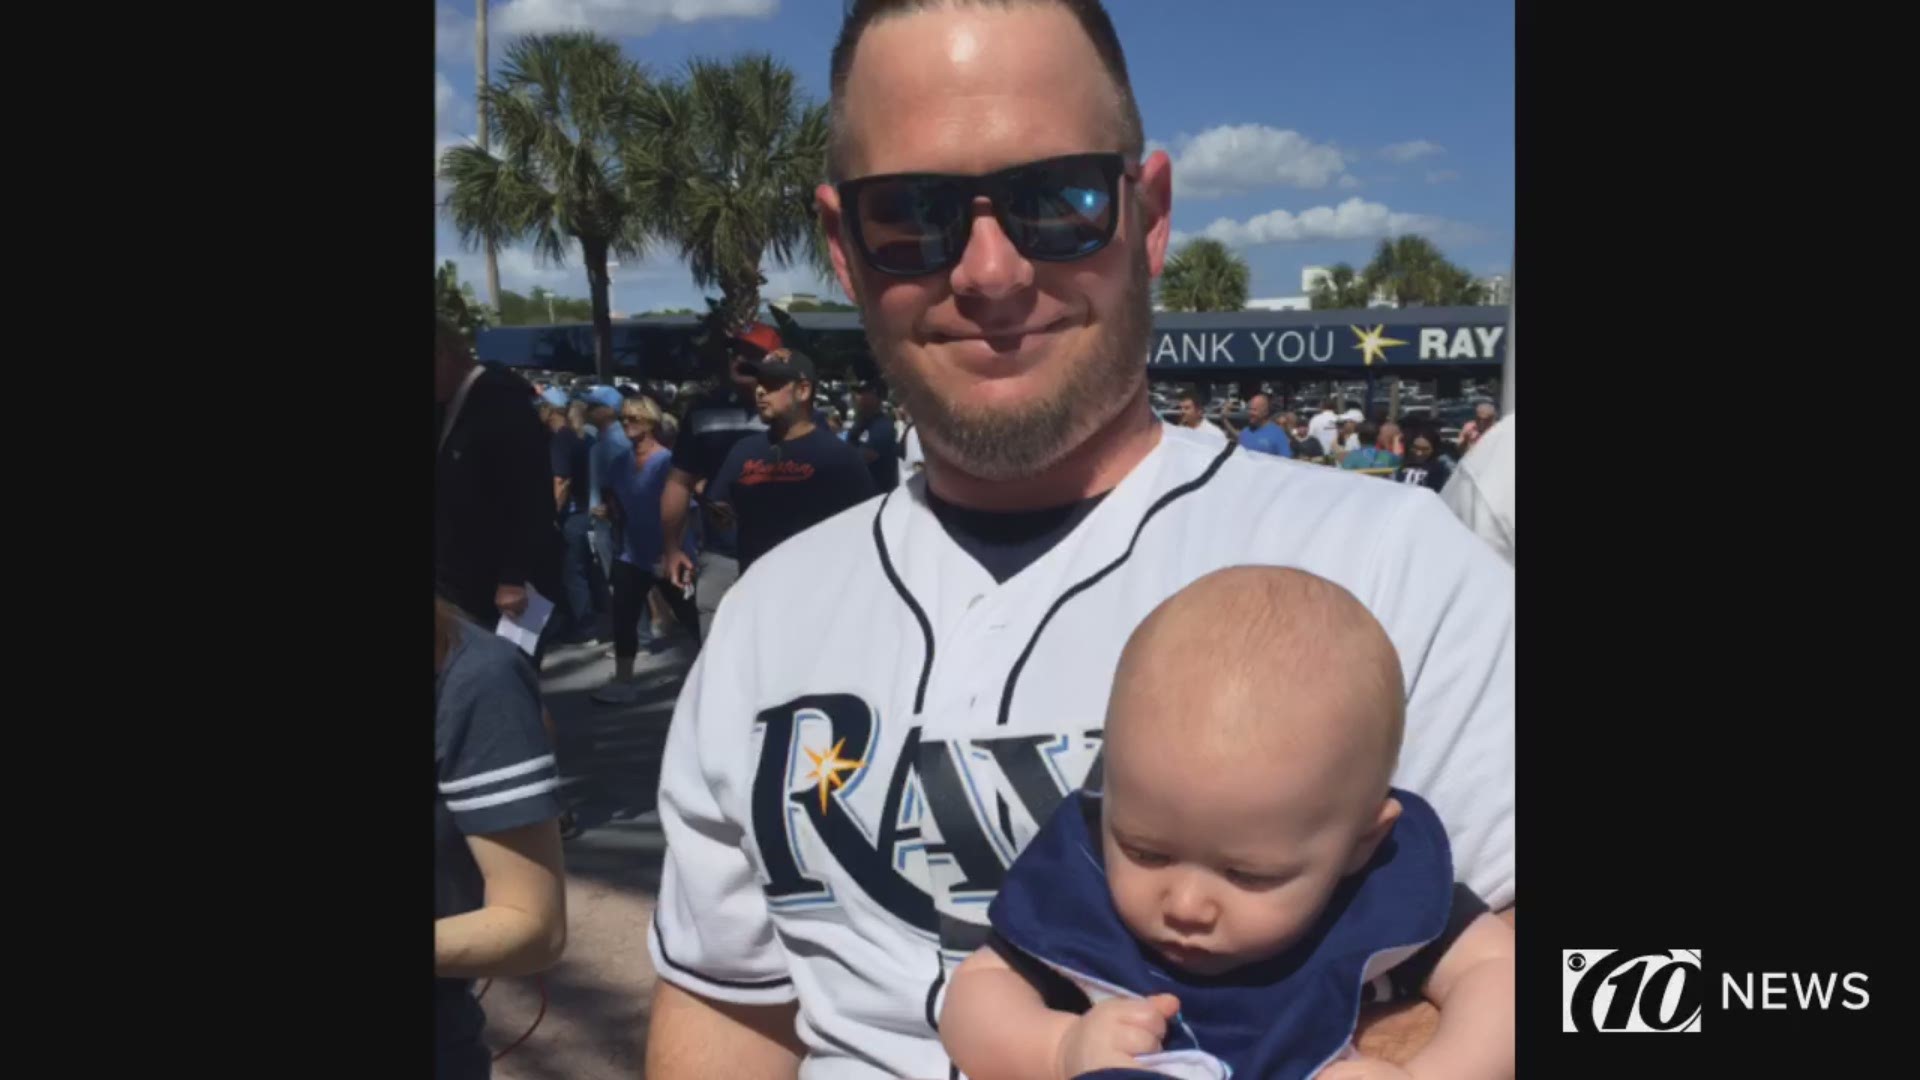 Rays drop Opening Day game against Astros, Blake Snell outdueled